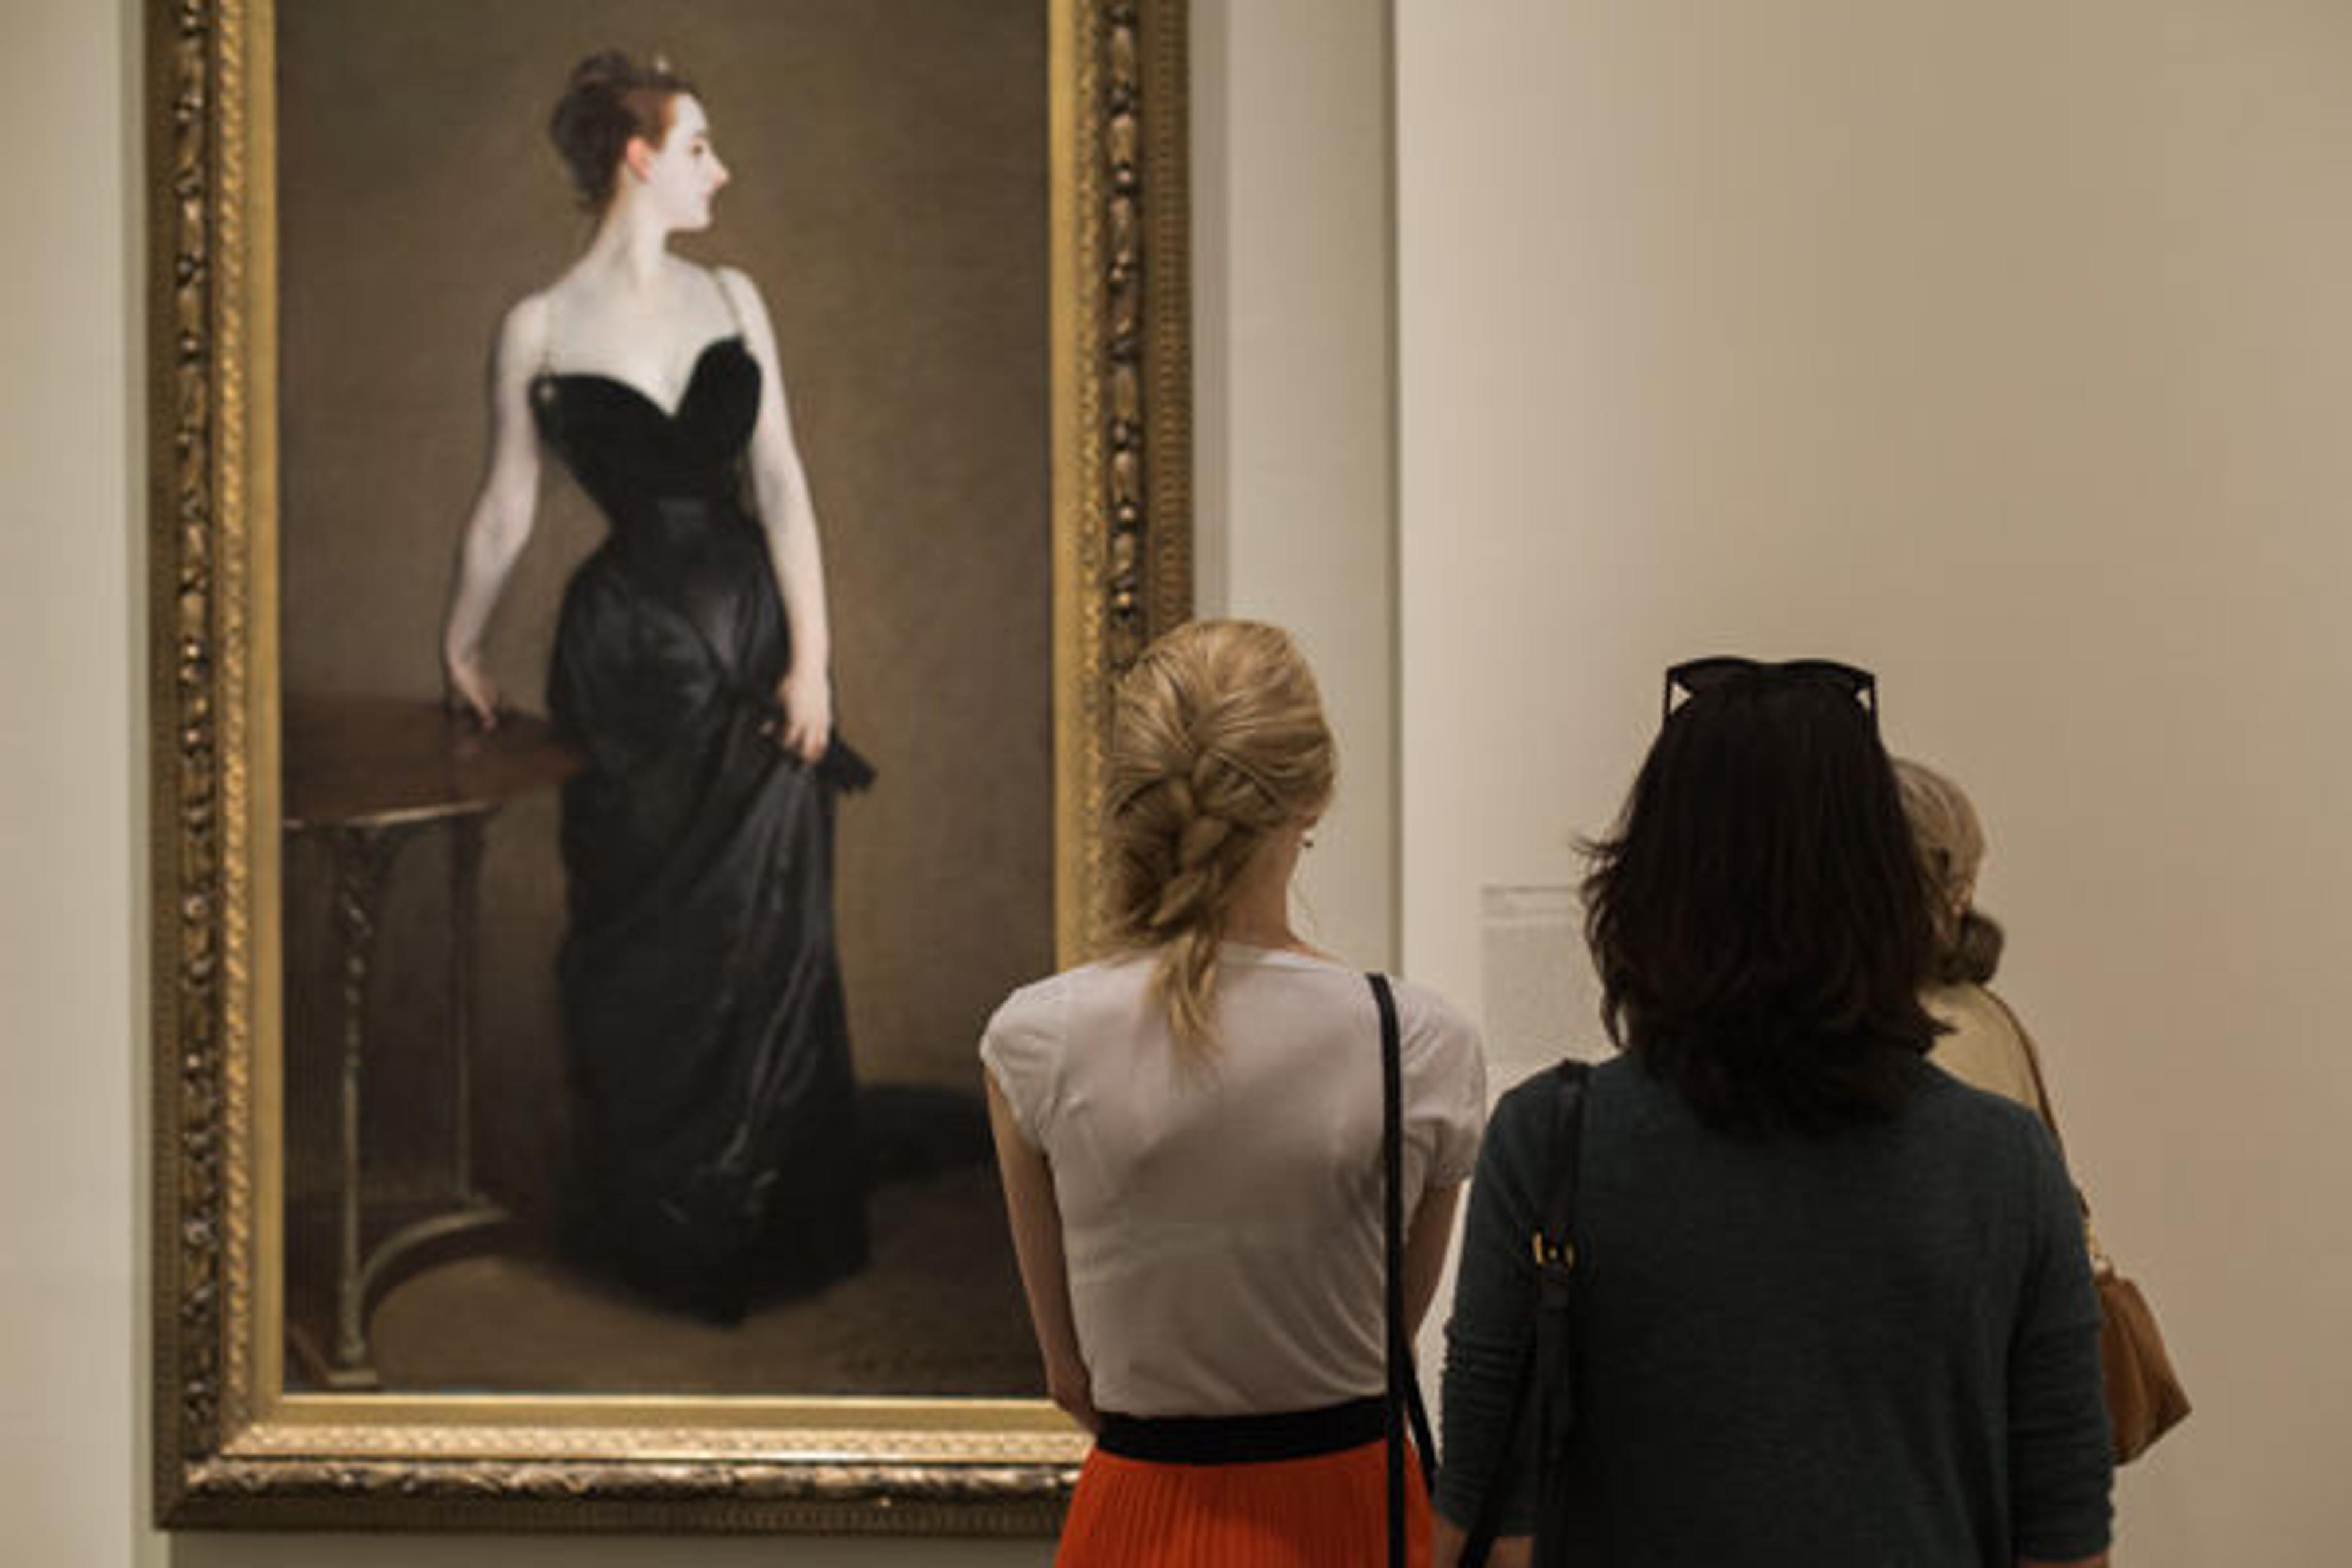 Attendees visited the special exhibition Sargent: Portraits of Artists and Friends as part of the evening's activities